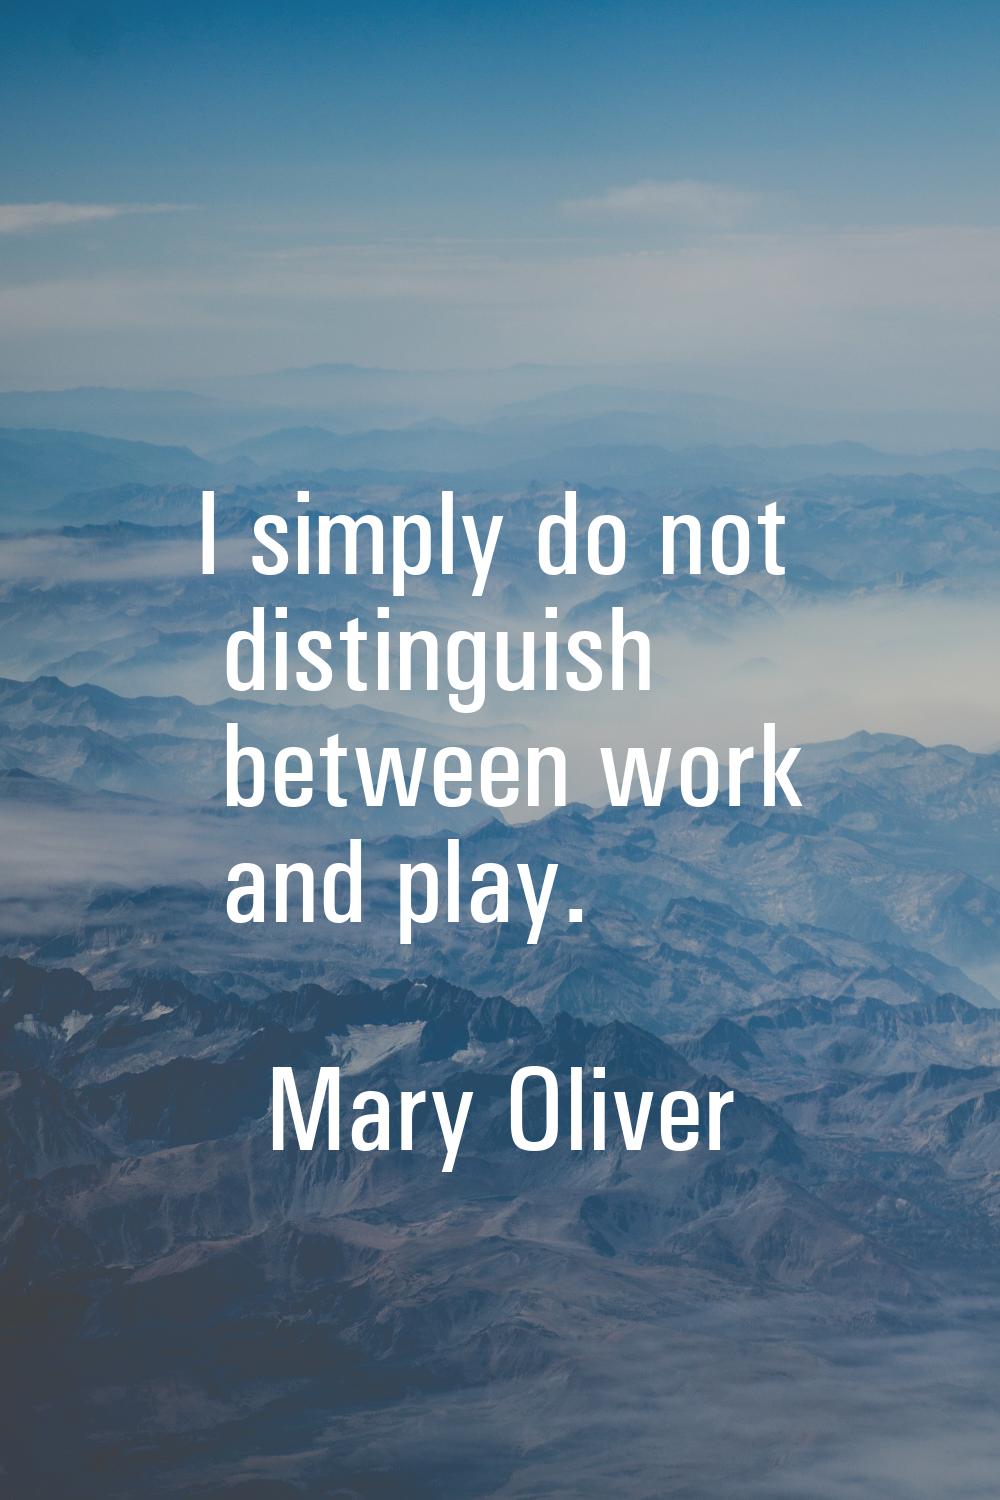 I simply do not distinguish between work and play.